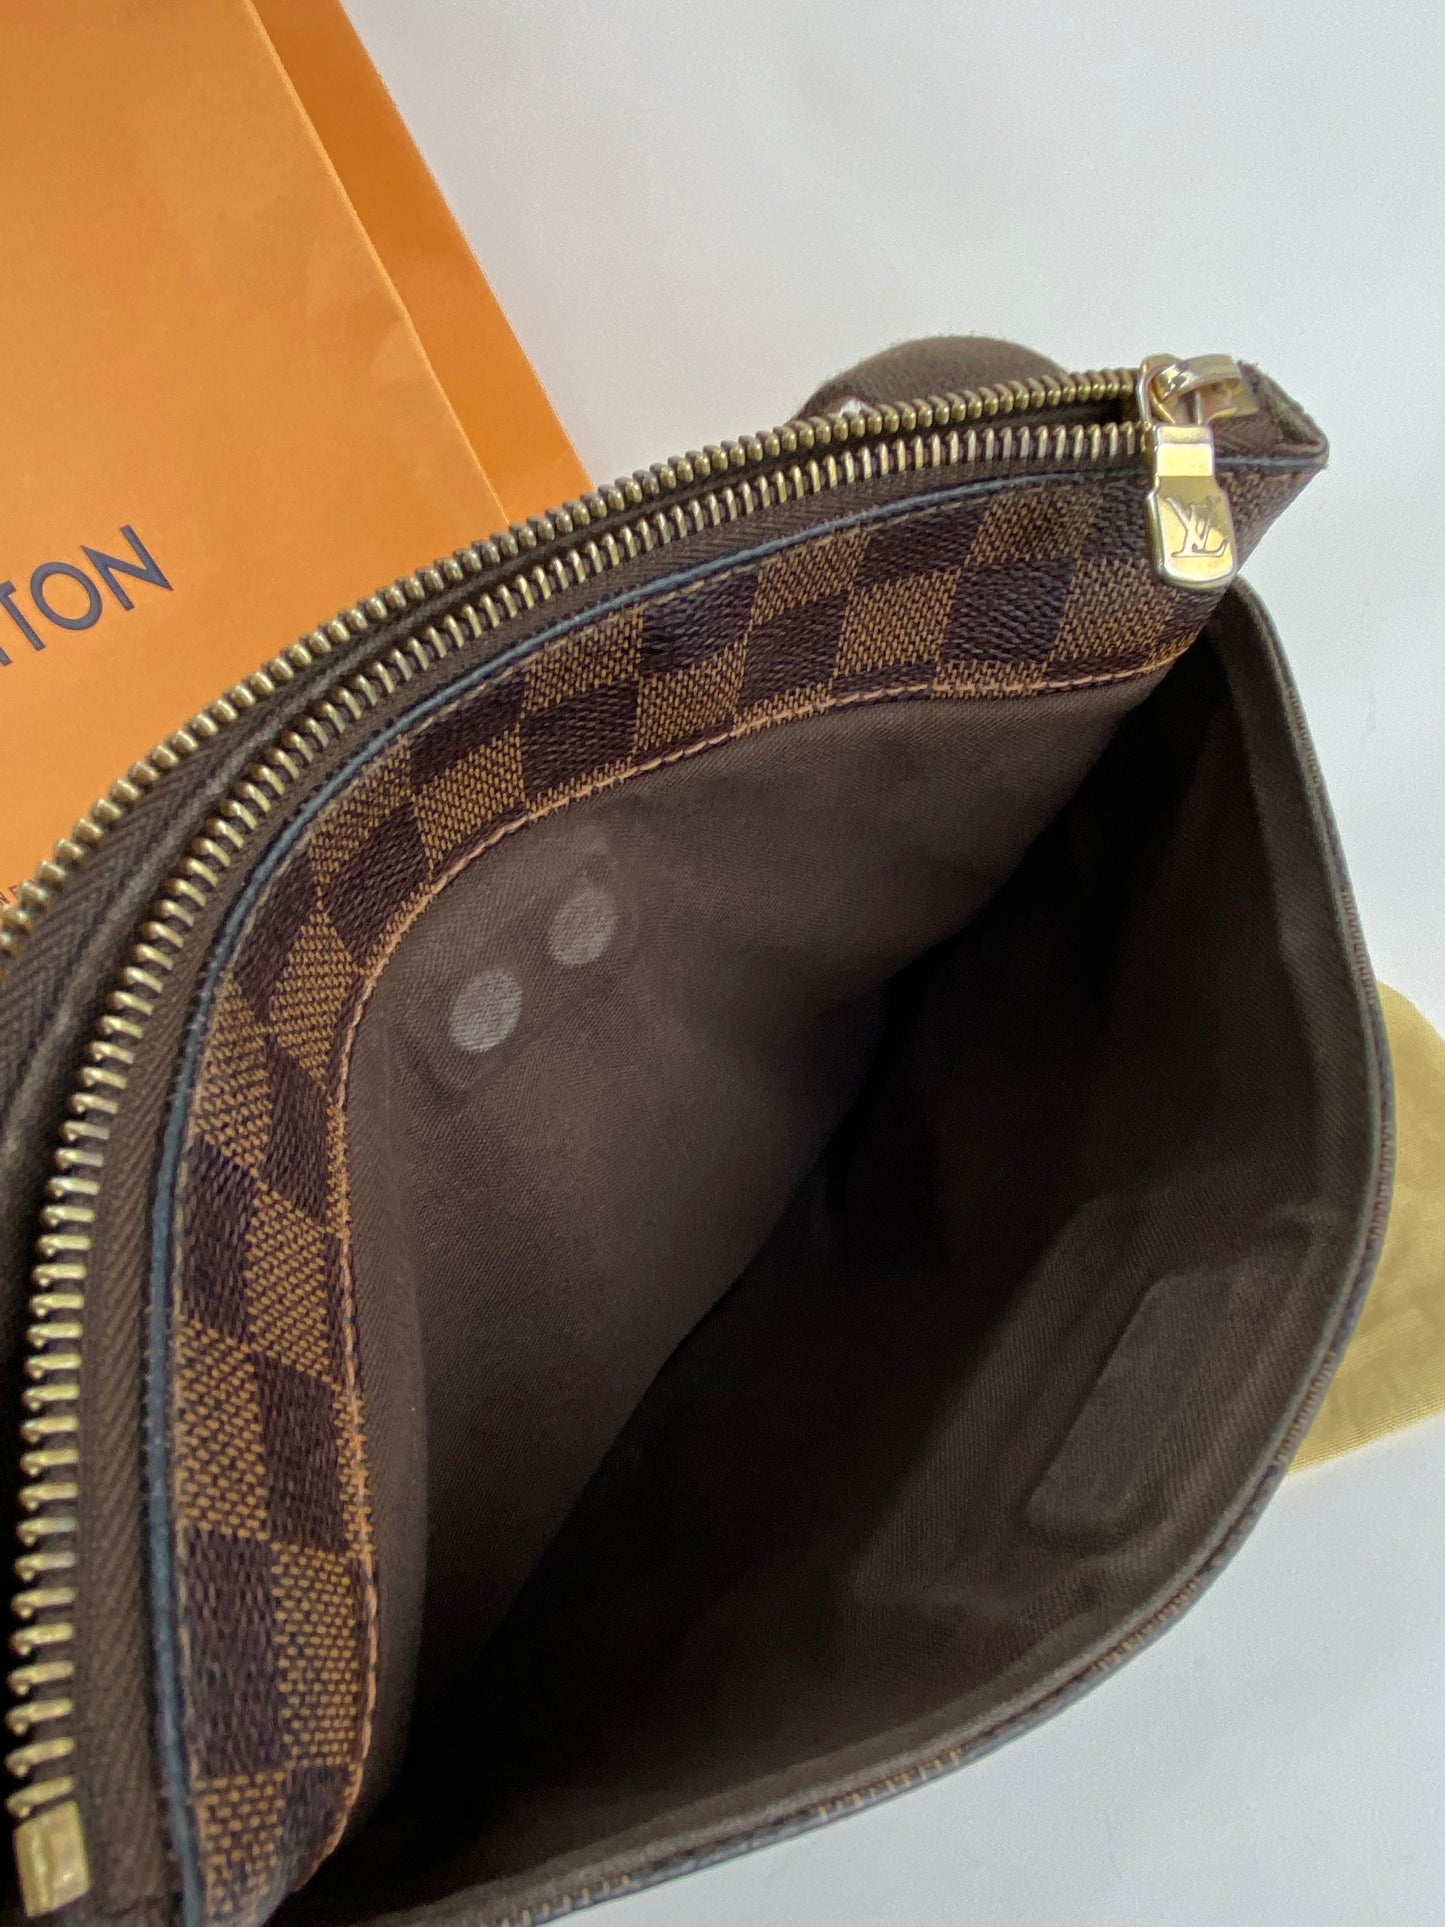 louis vuitton purse with gold plate